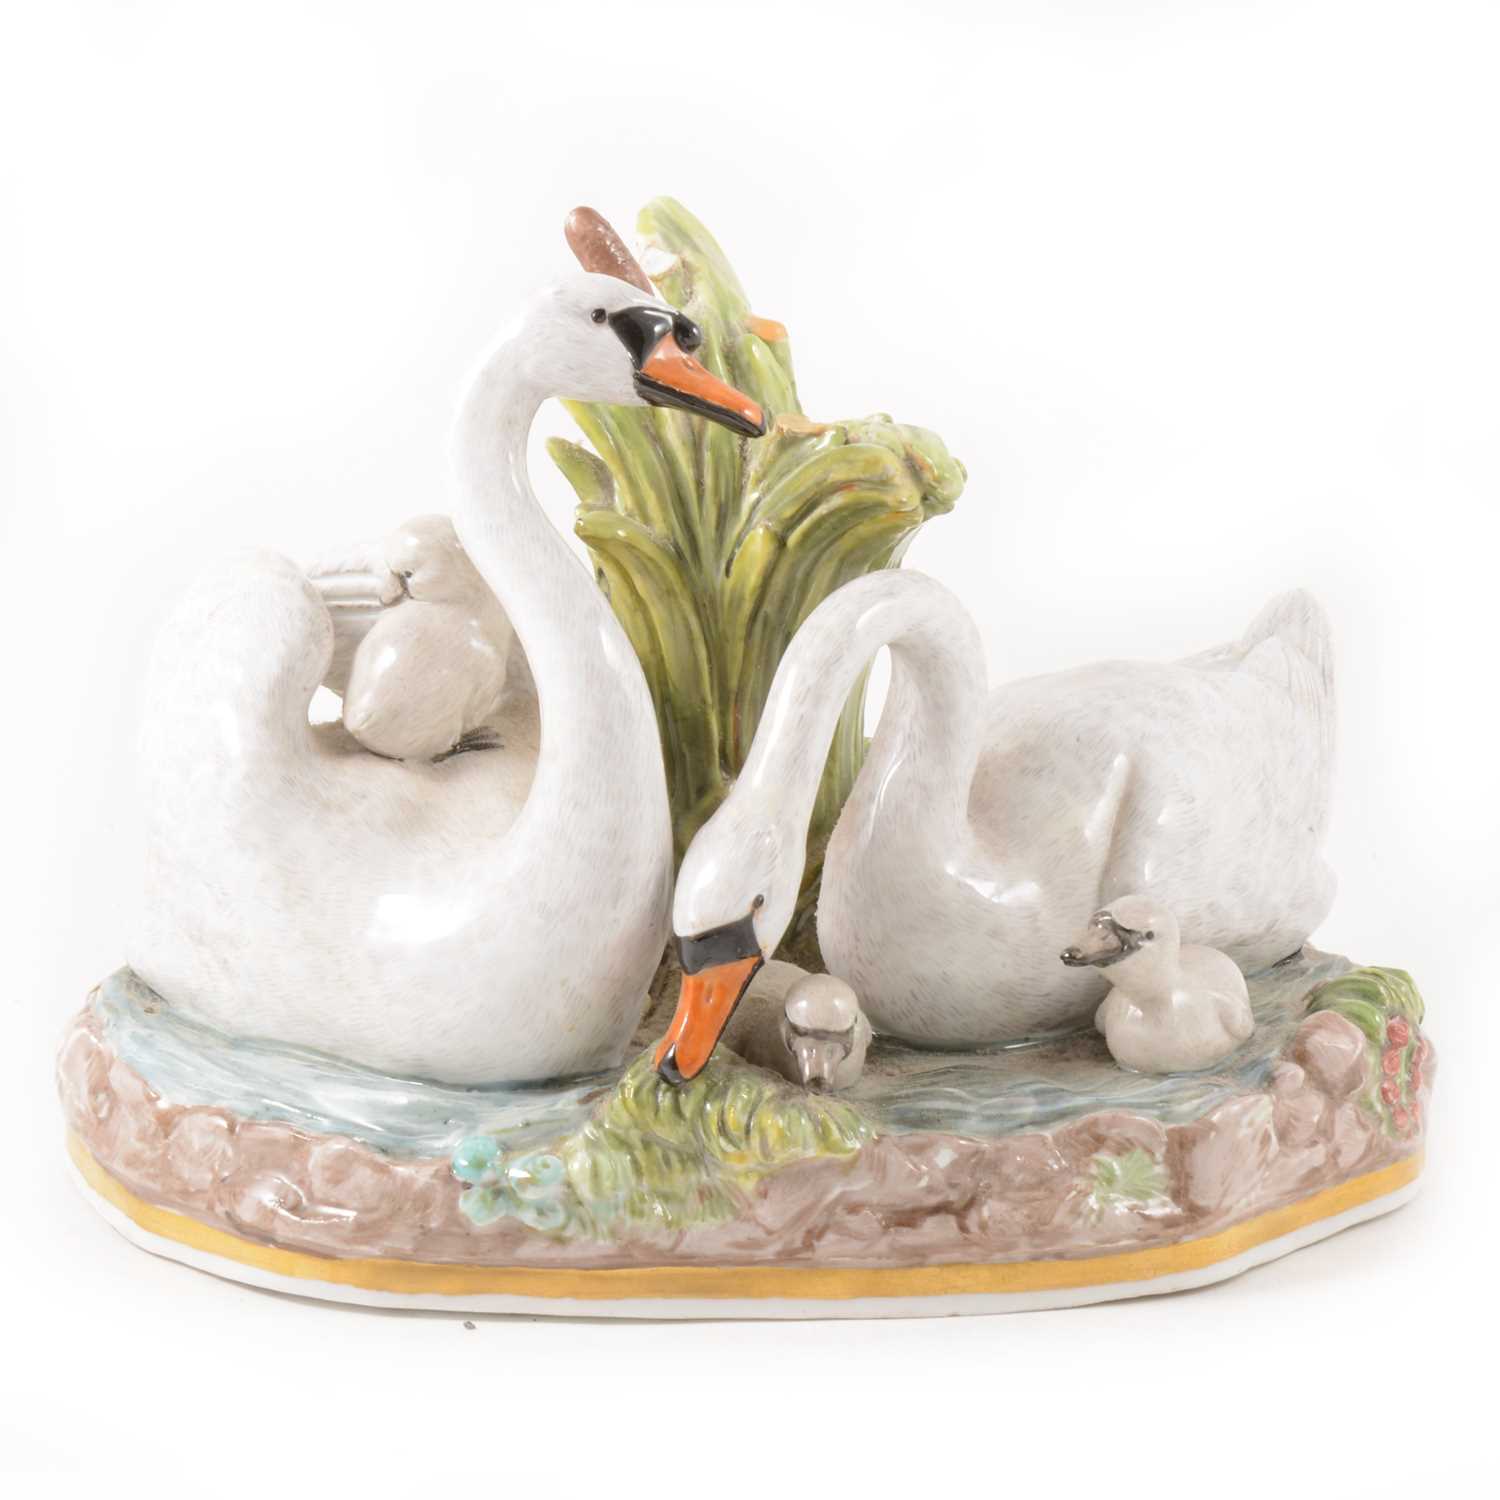 Lot 40 - A large Meissen porcelain group of swans and cygnets on a pond